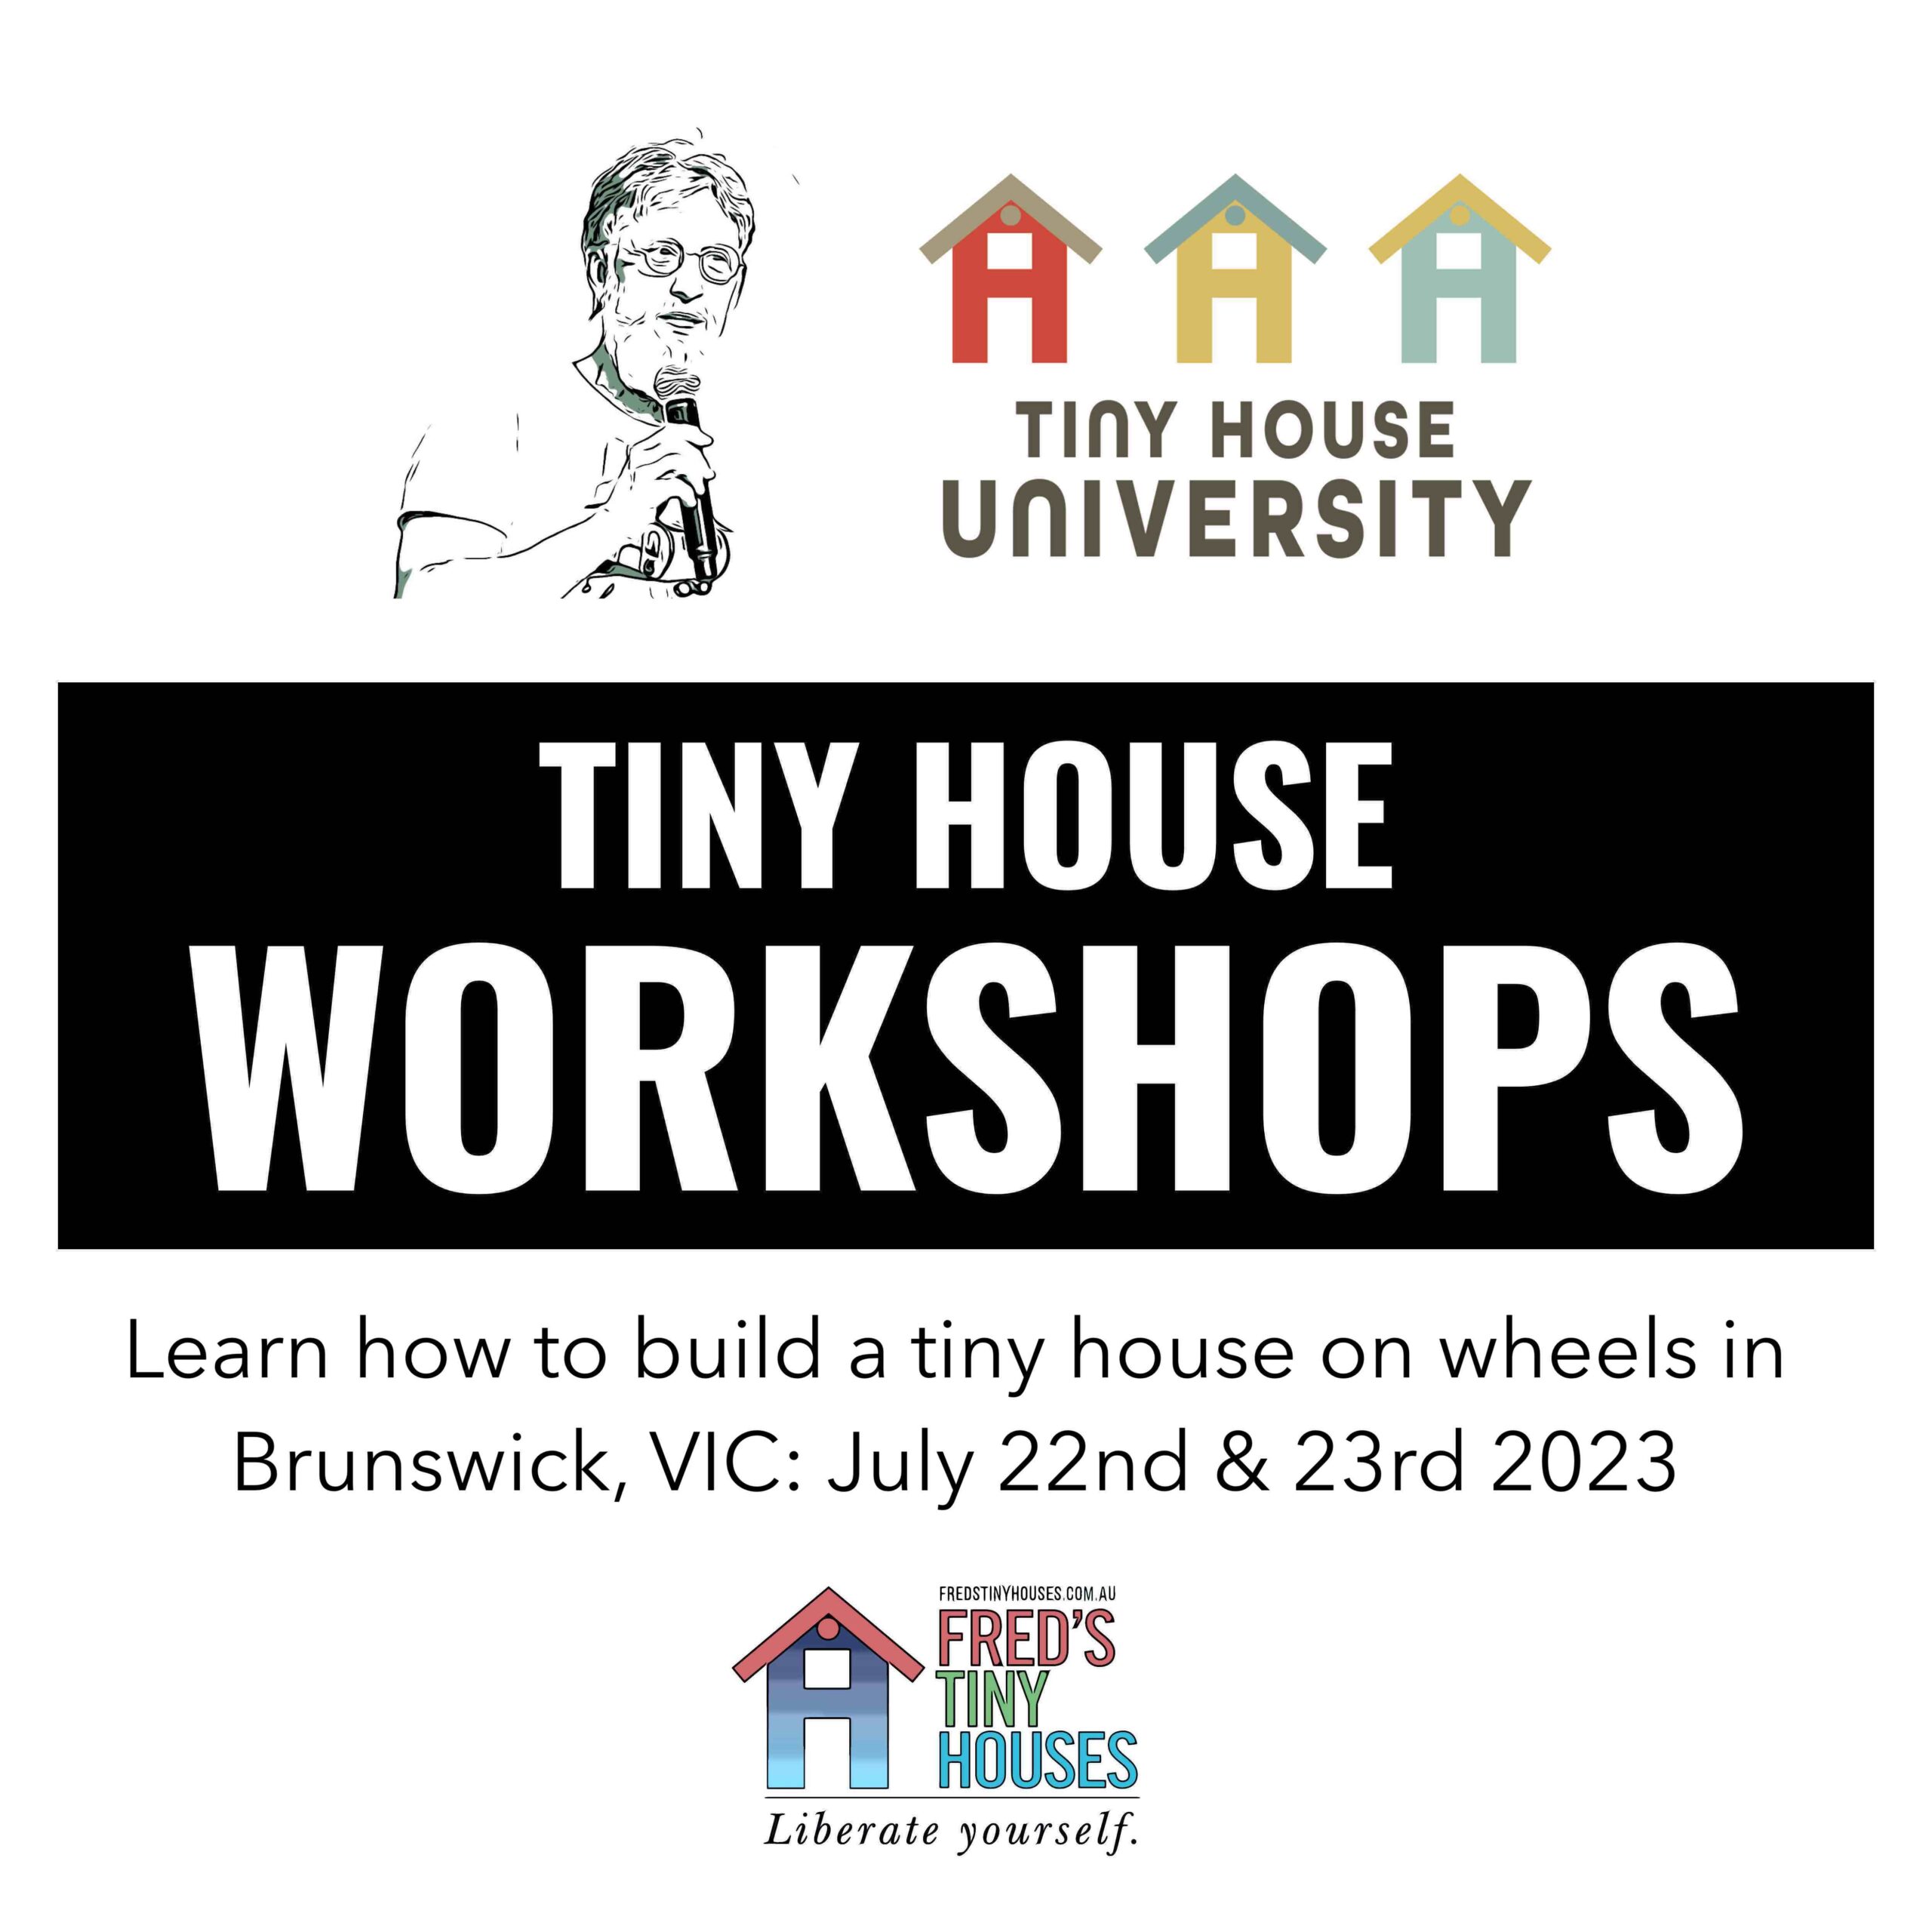 Tiny House Workshops How To Build a Tiny House on Wheels in Australia